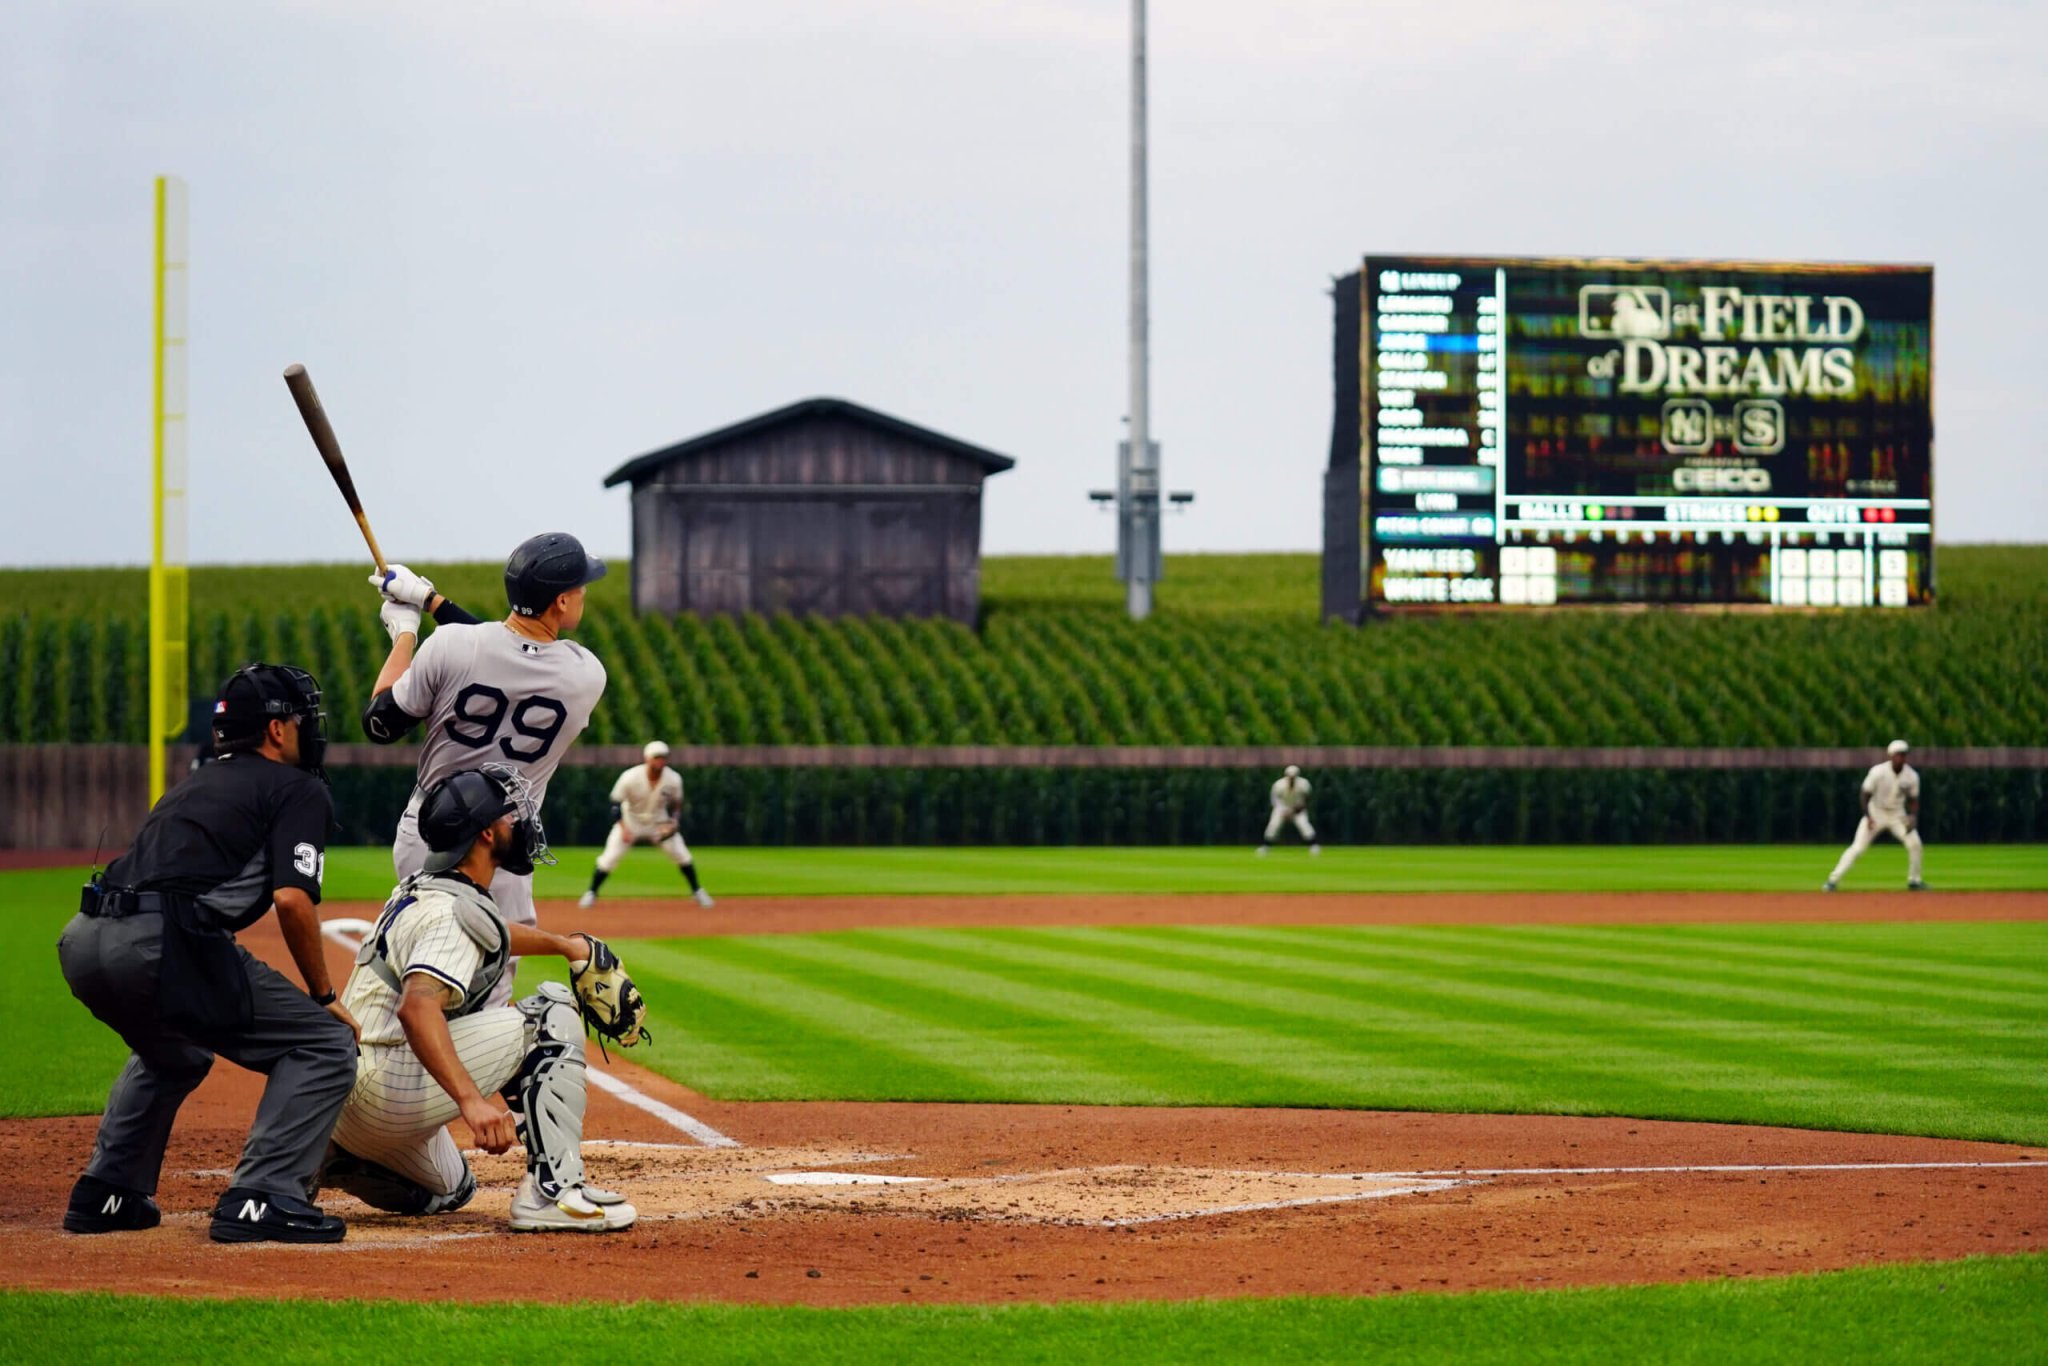 MLB Field of Dreams Game: White Sox beat Yankees as Tim Anderson